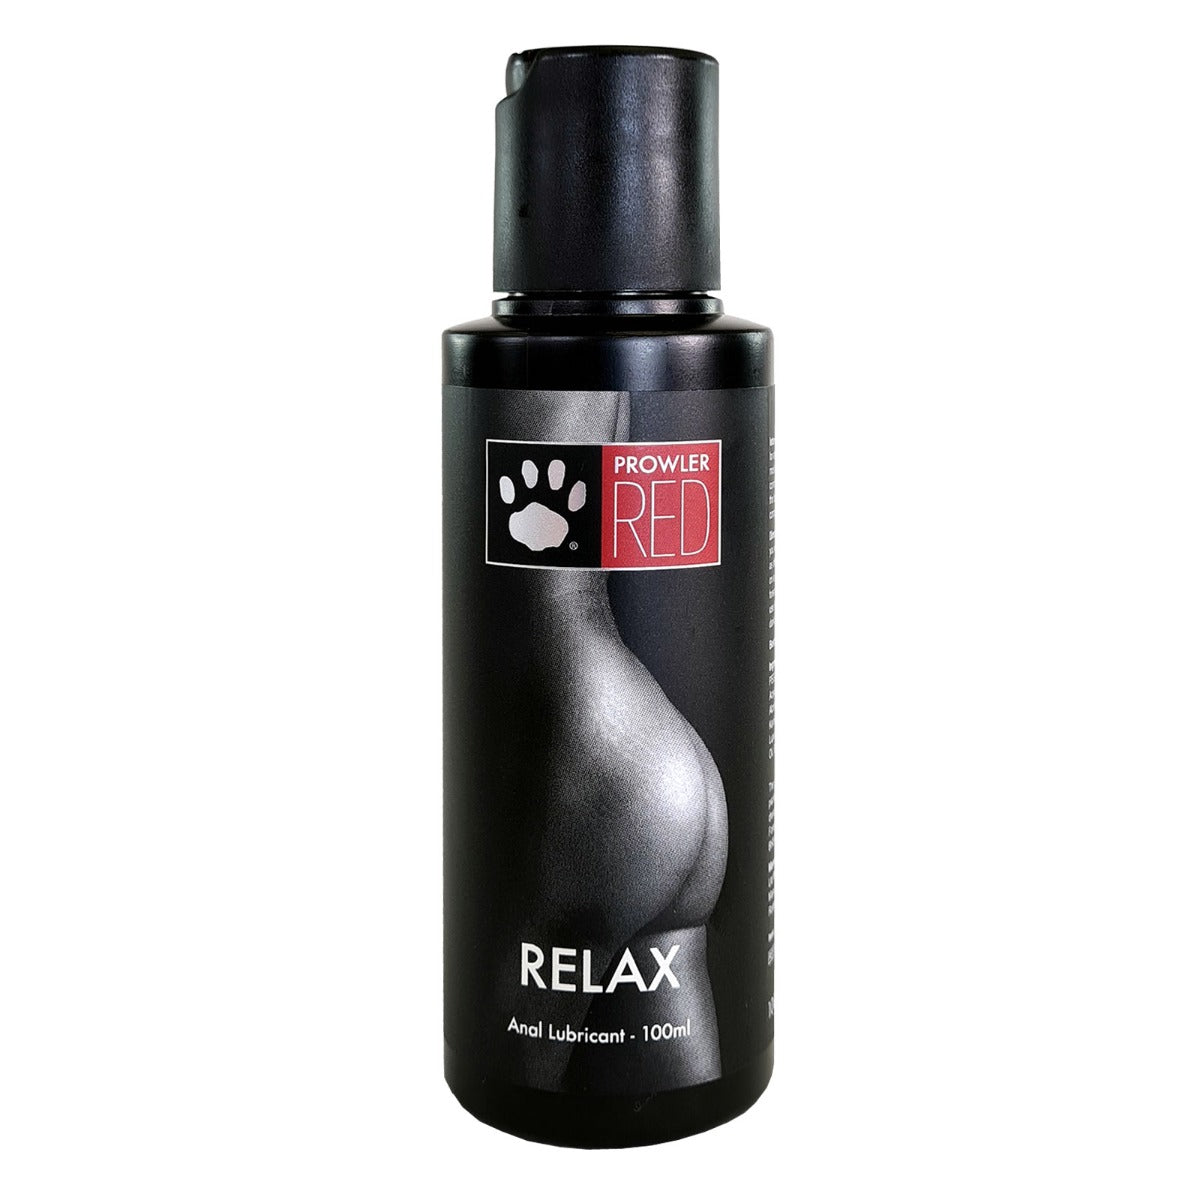 Prowler RED Relax Anal Water Based Lube 100ml